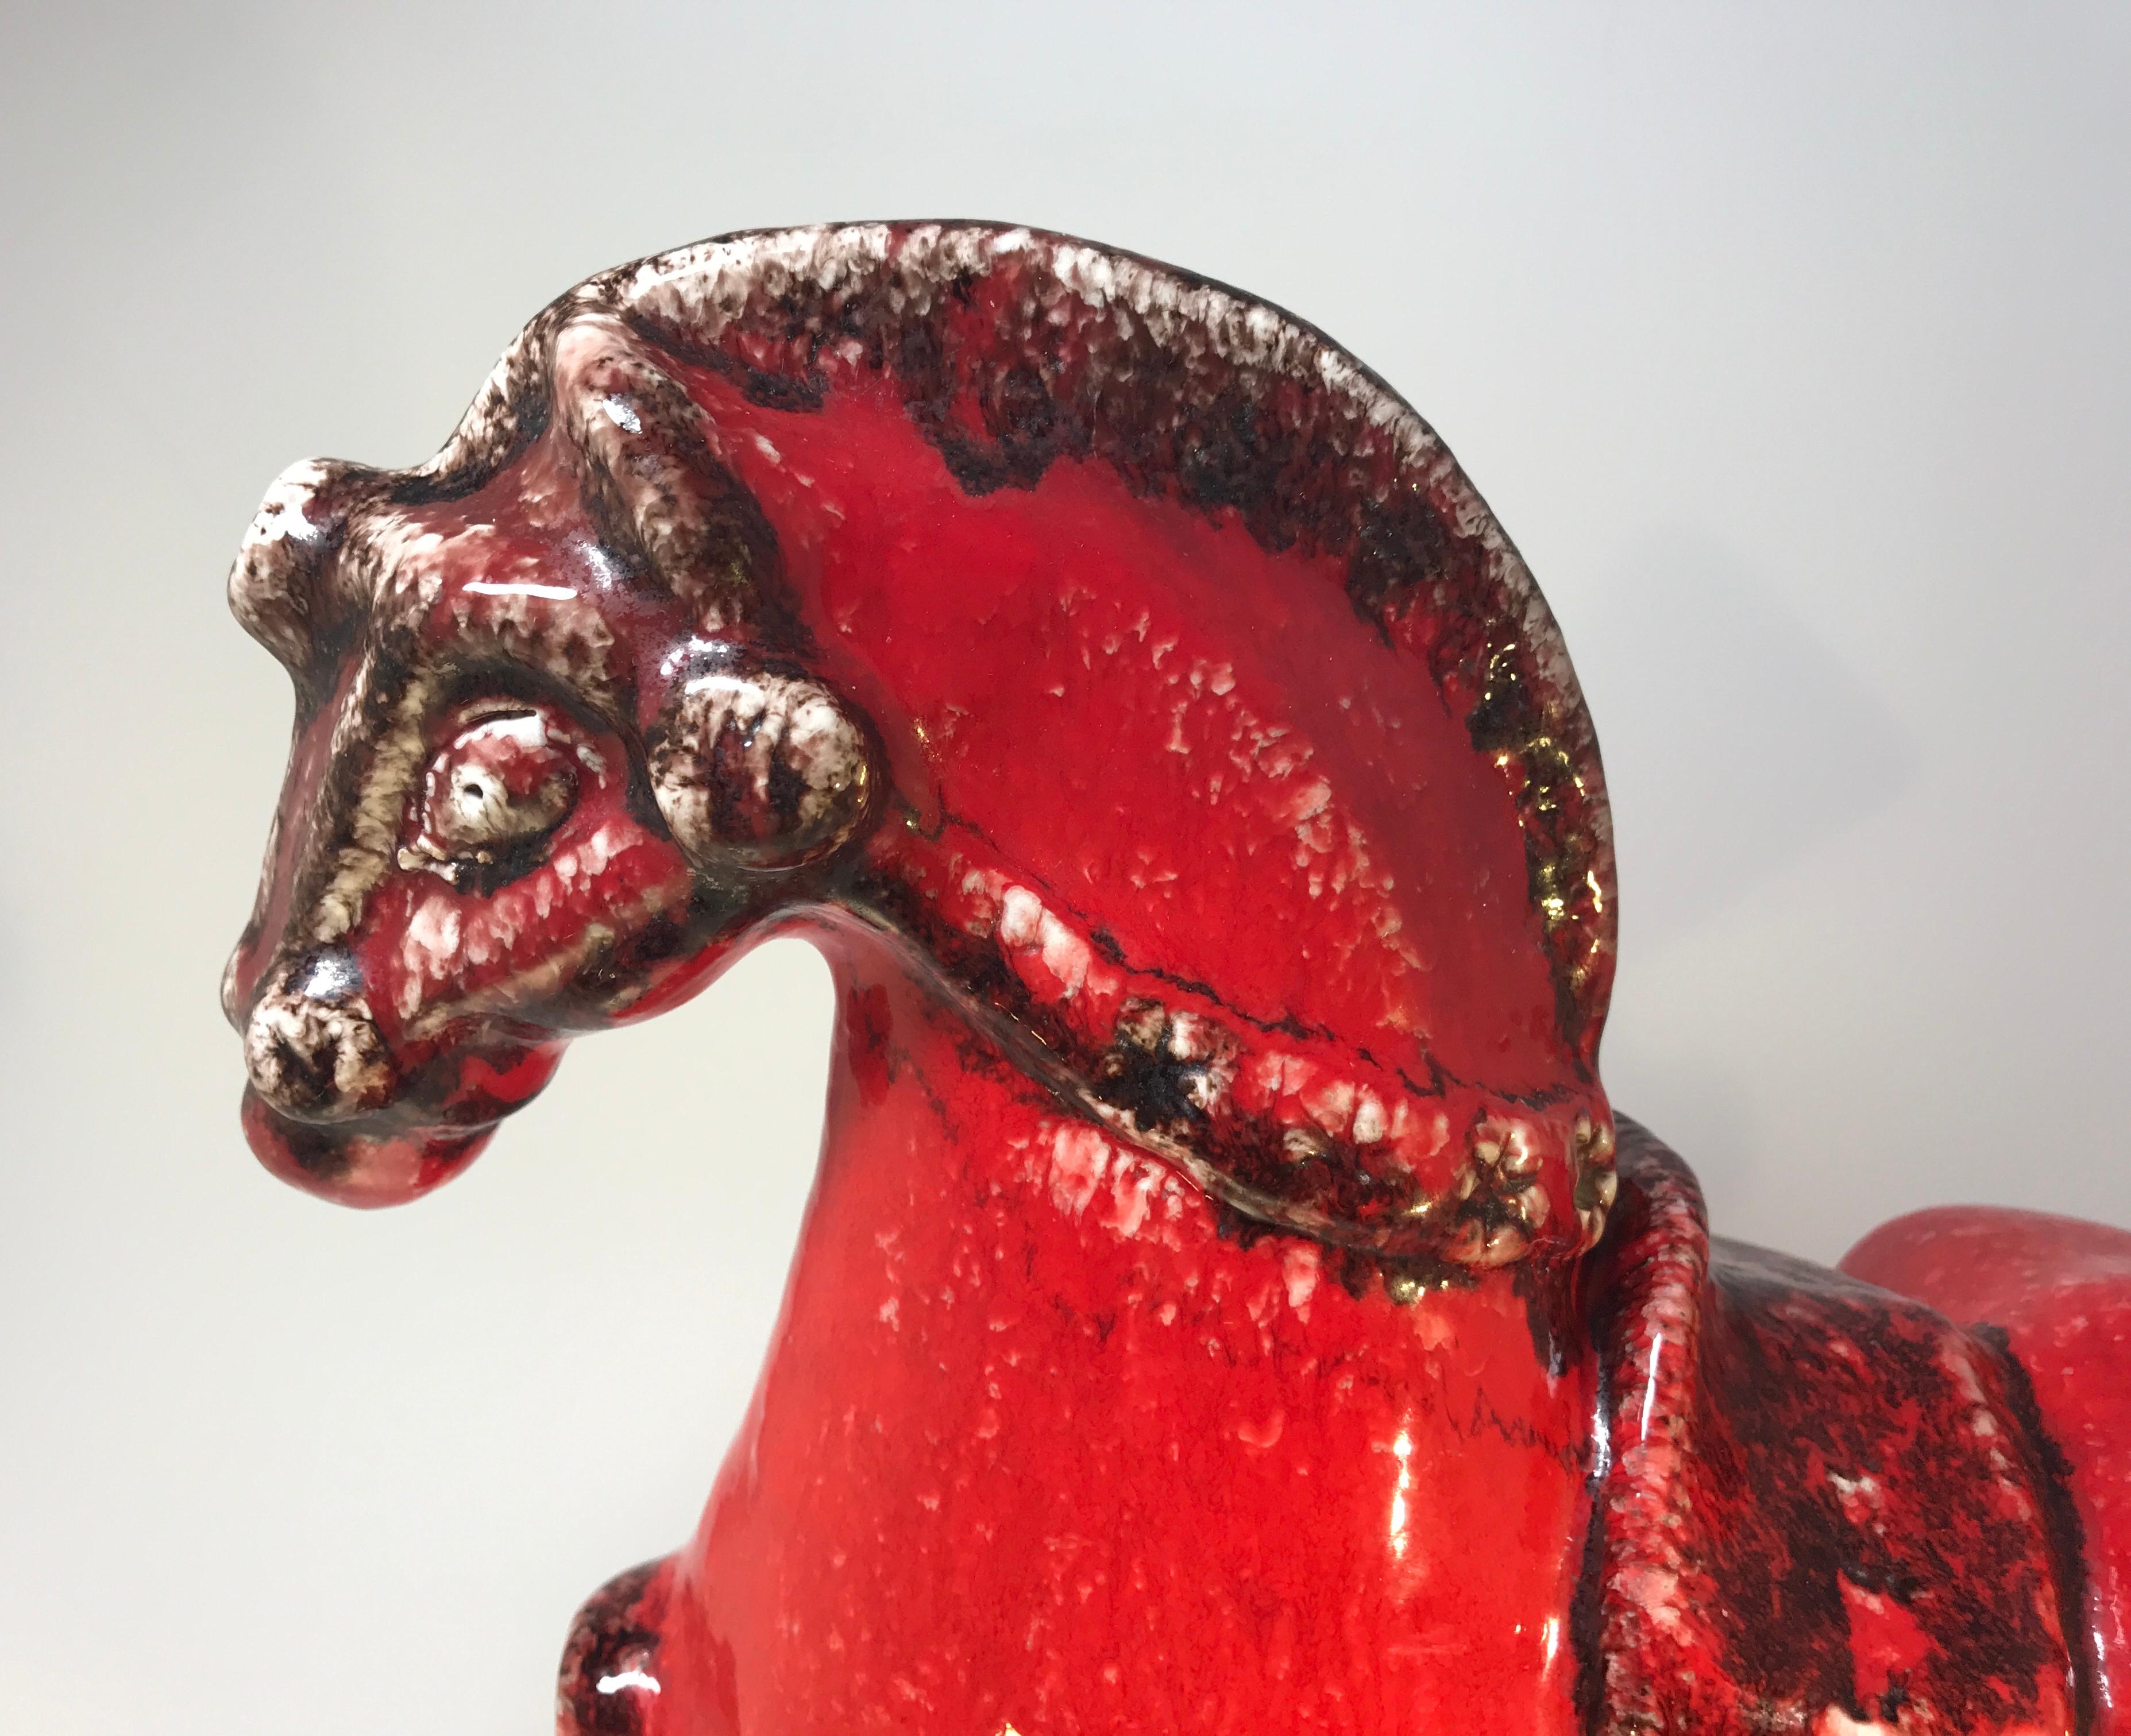 Imposing and eye-catching, tall bright red and black Italian ceramic horse from Nuovo Rinascemento,
circa 1960s
This is very much a 'Statement Piece' of Italian design
Measures: Height 12 inch, length 12 inch, depth 4.75 inch
Excellent condition